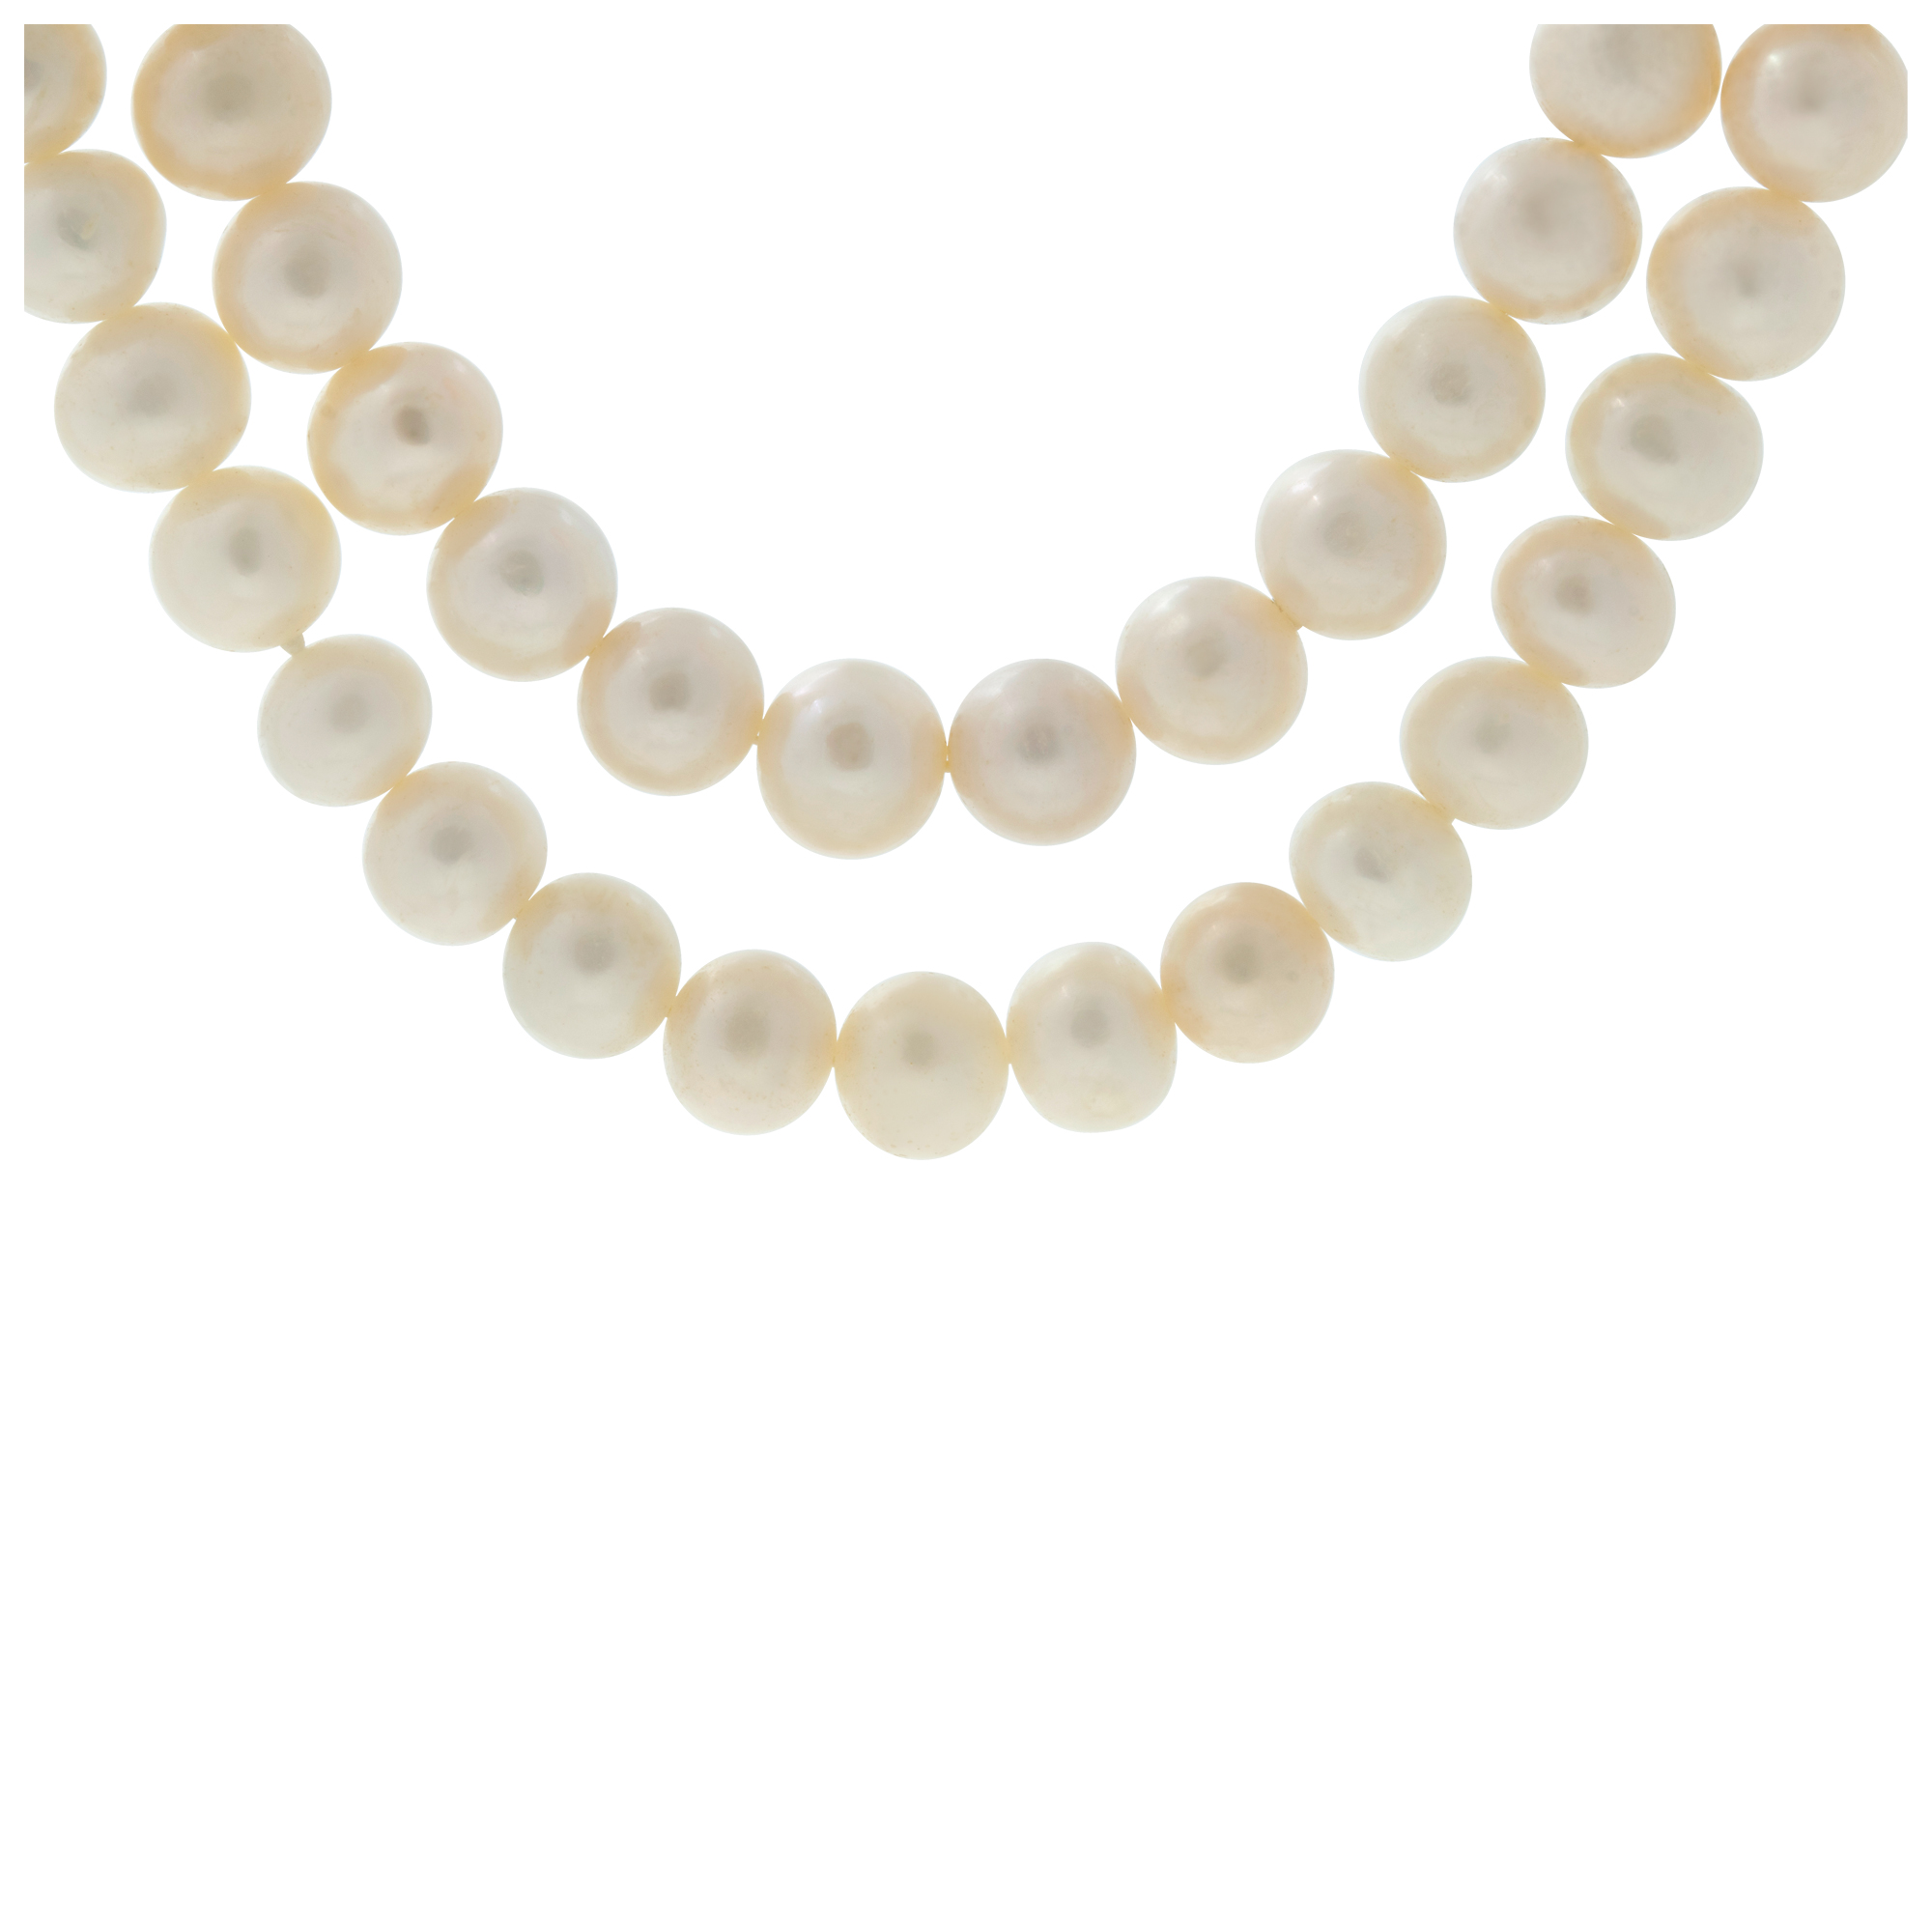 Fresh Water Pearl "Sautoir" 68 Inches Long, With A 14kt Y Gold Clasp, 226 Pearls, 9.5 X 10mm.